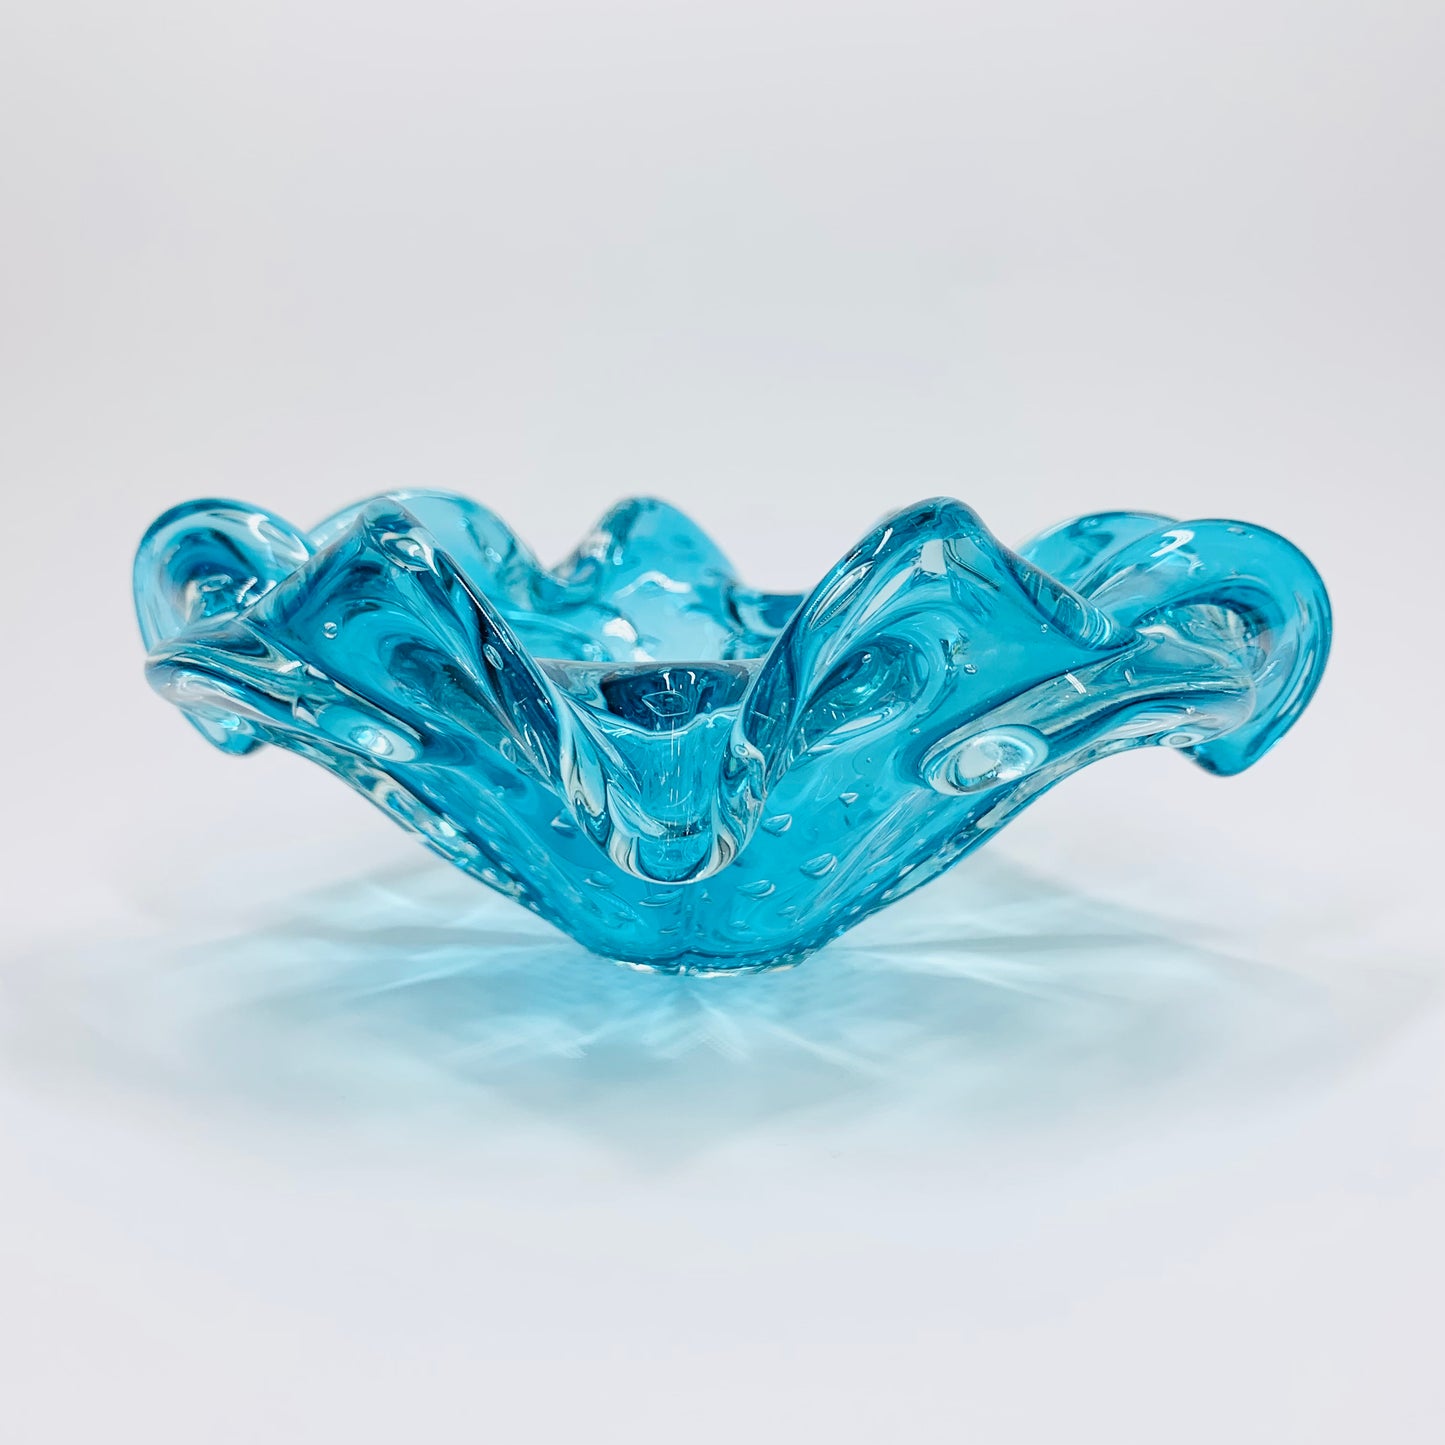 Rare Midcentury Murano turquoise sommerso glass bowl/ashtray with controlled bubbles